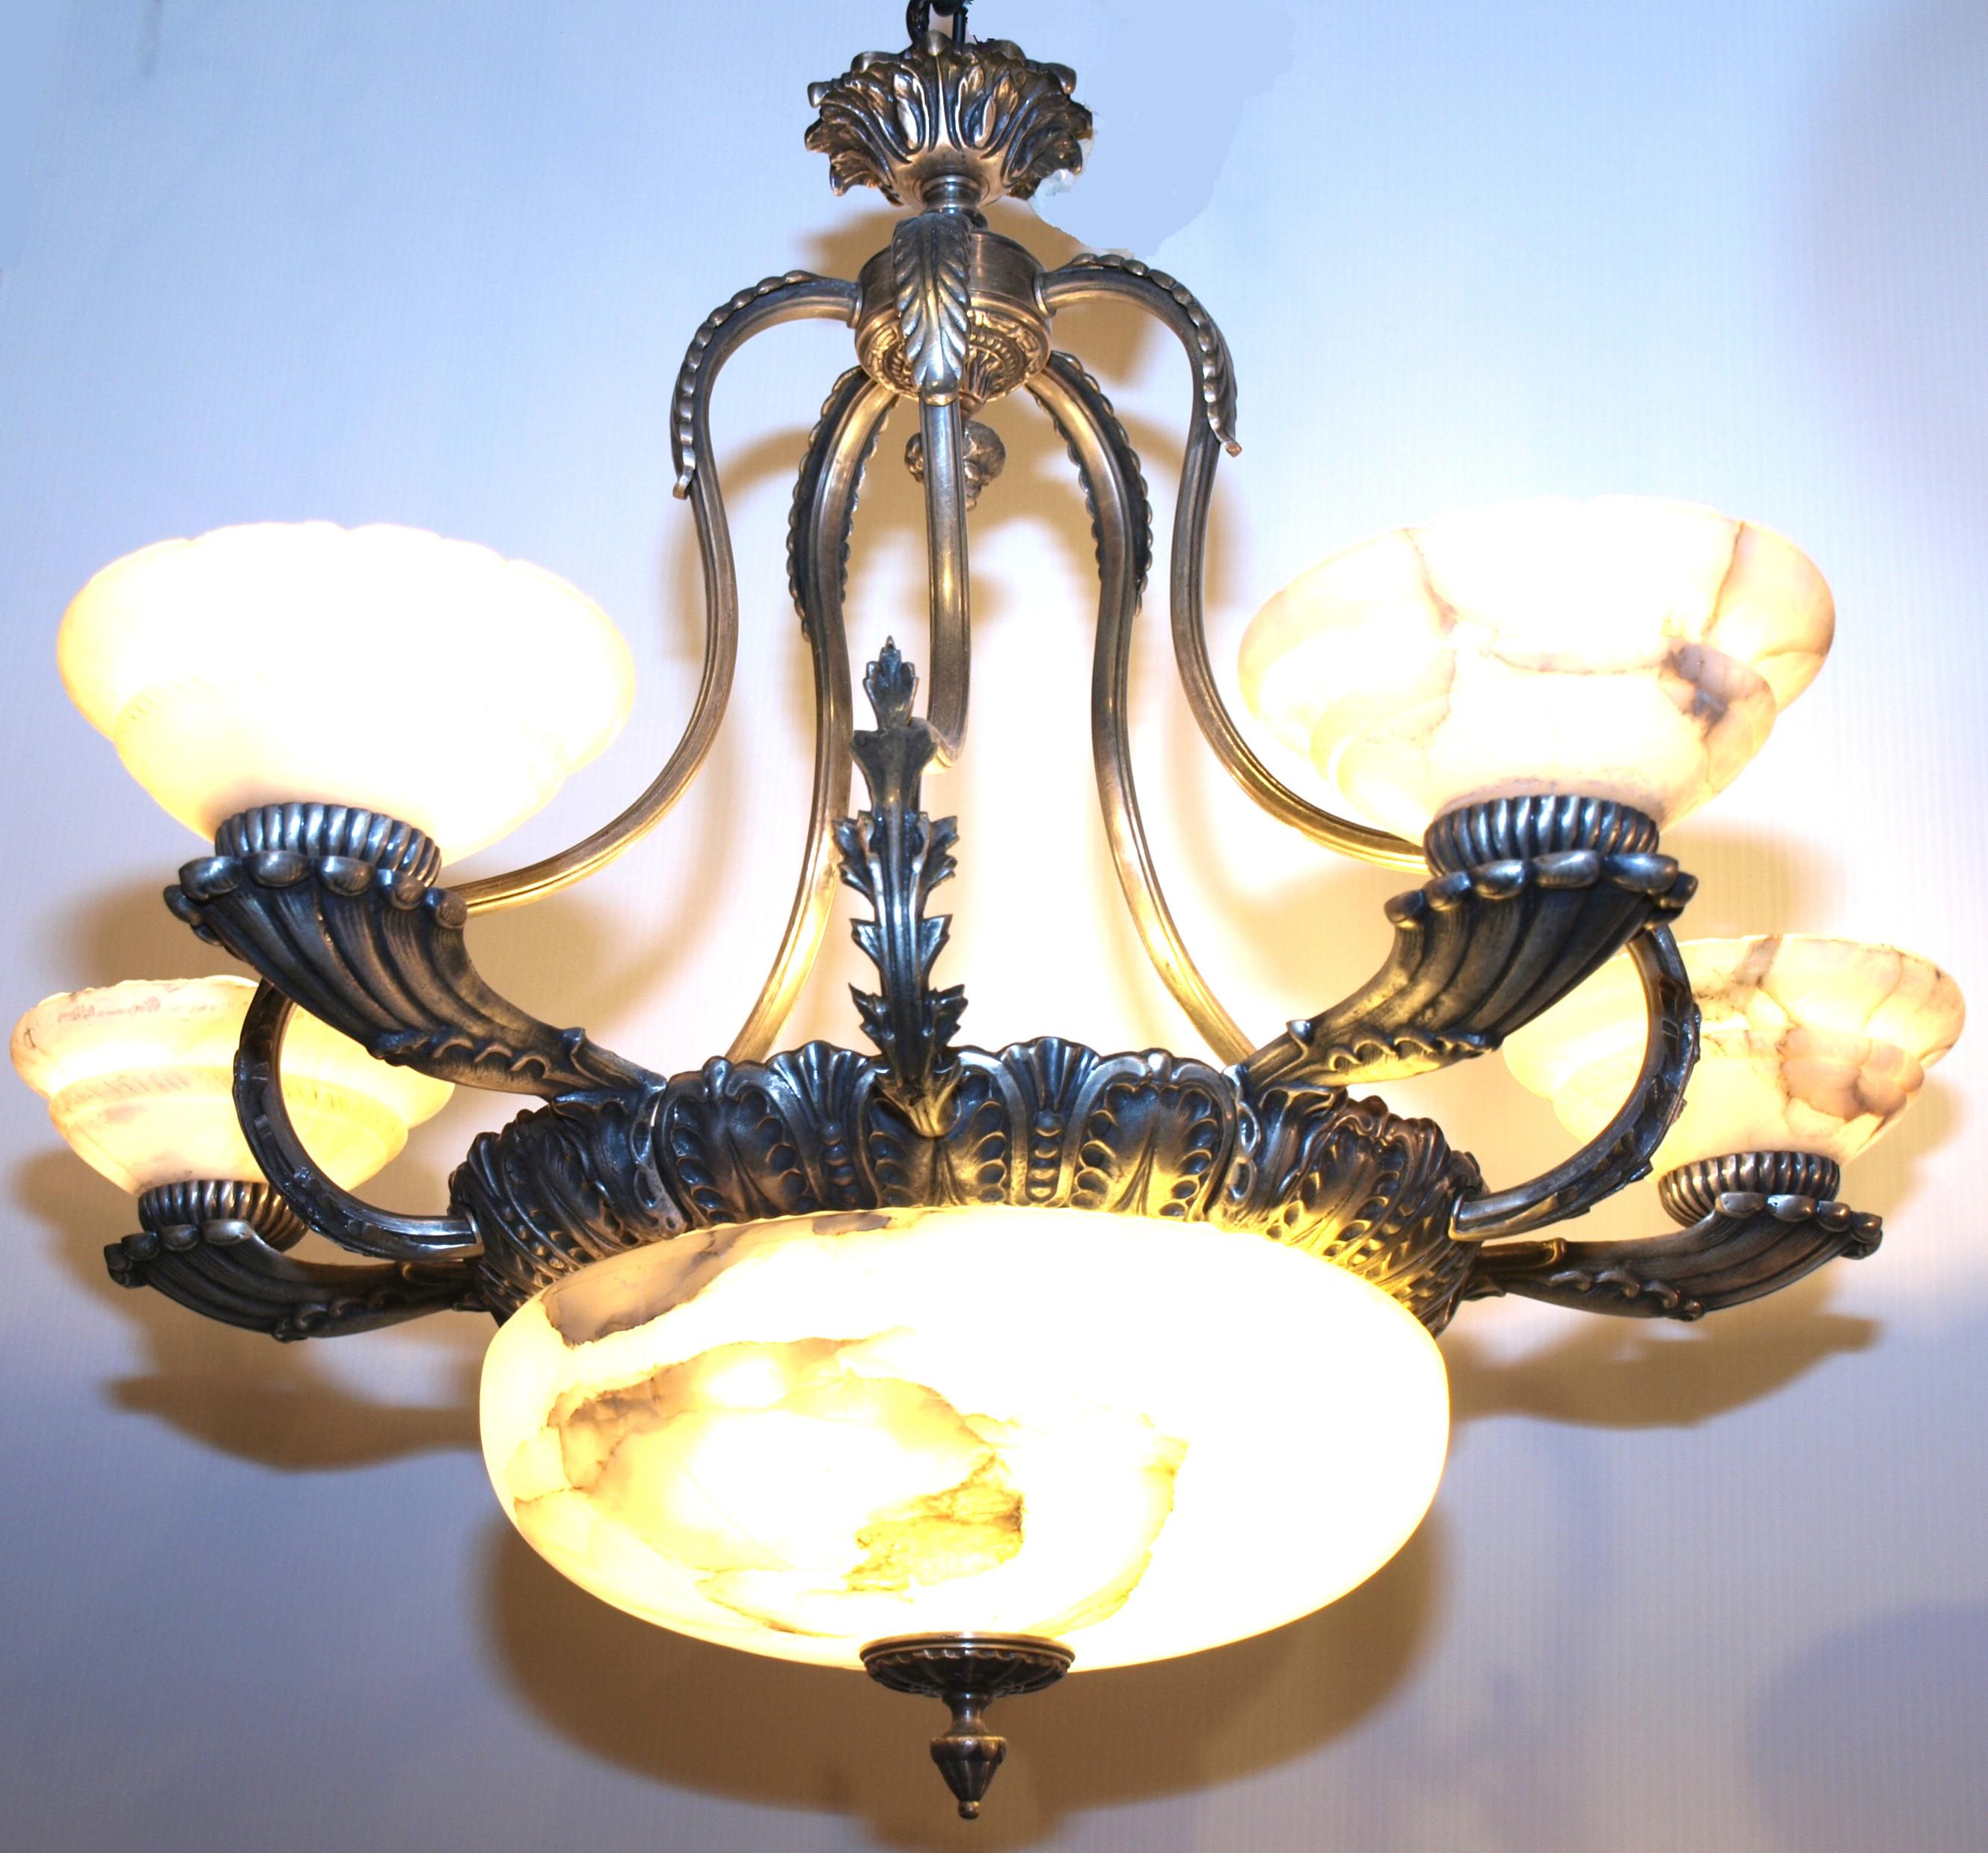 Elegant silver over bronze chandelier with alabaster bowl and shades.